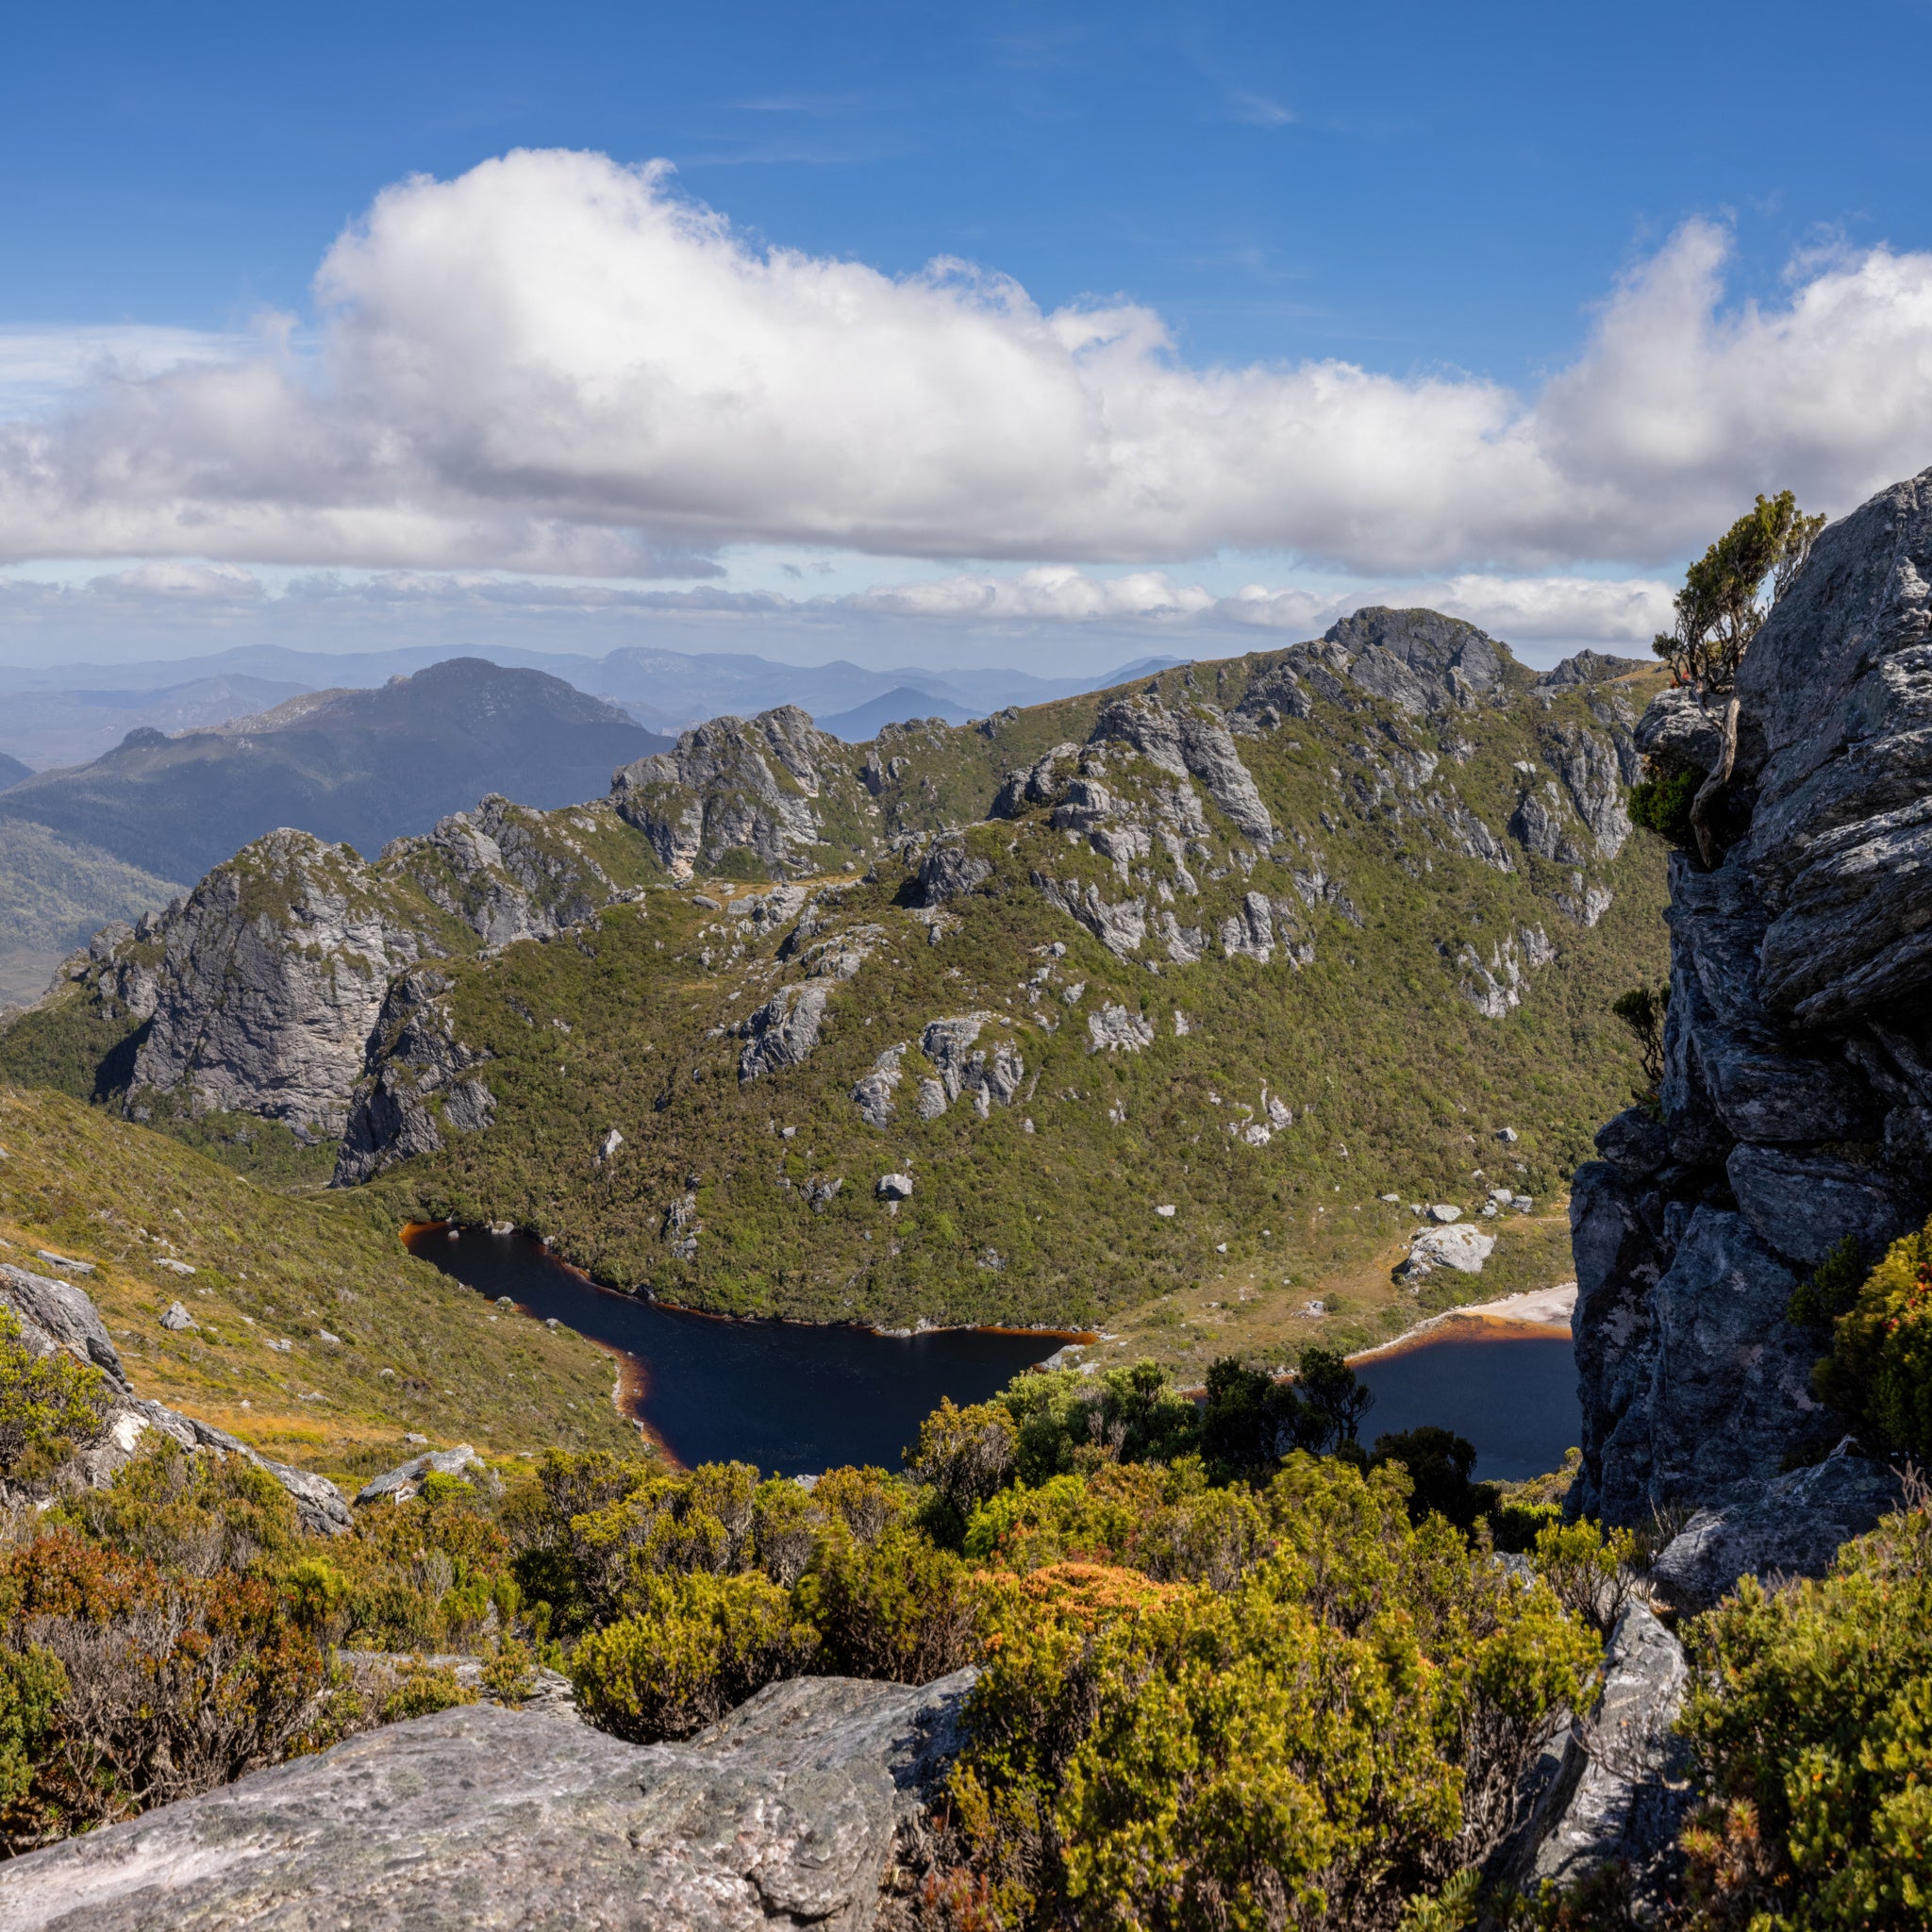 Peeping around a rock at the top of the corrie wall to catch a glimpse of Lake Cygnus below. Taken on a beautiful morning at the top of the Western Arthurs in Tasmania, Australia